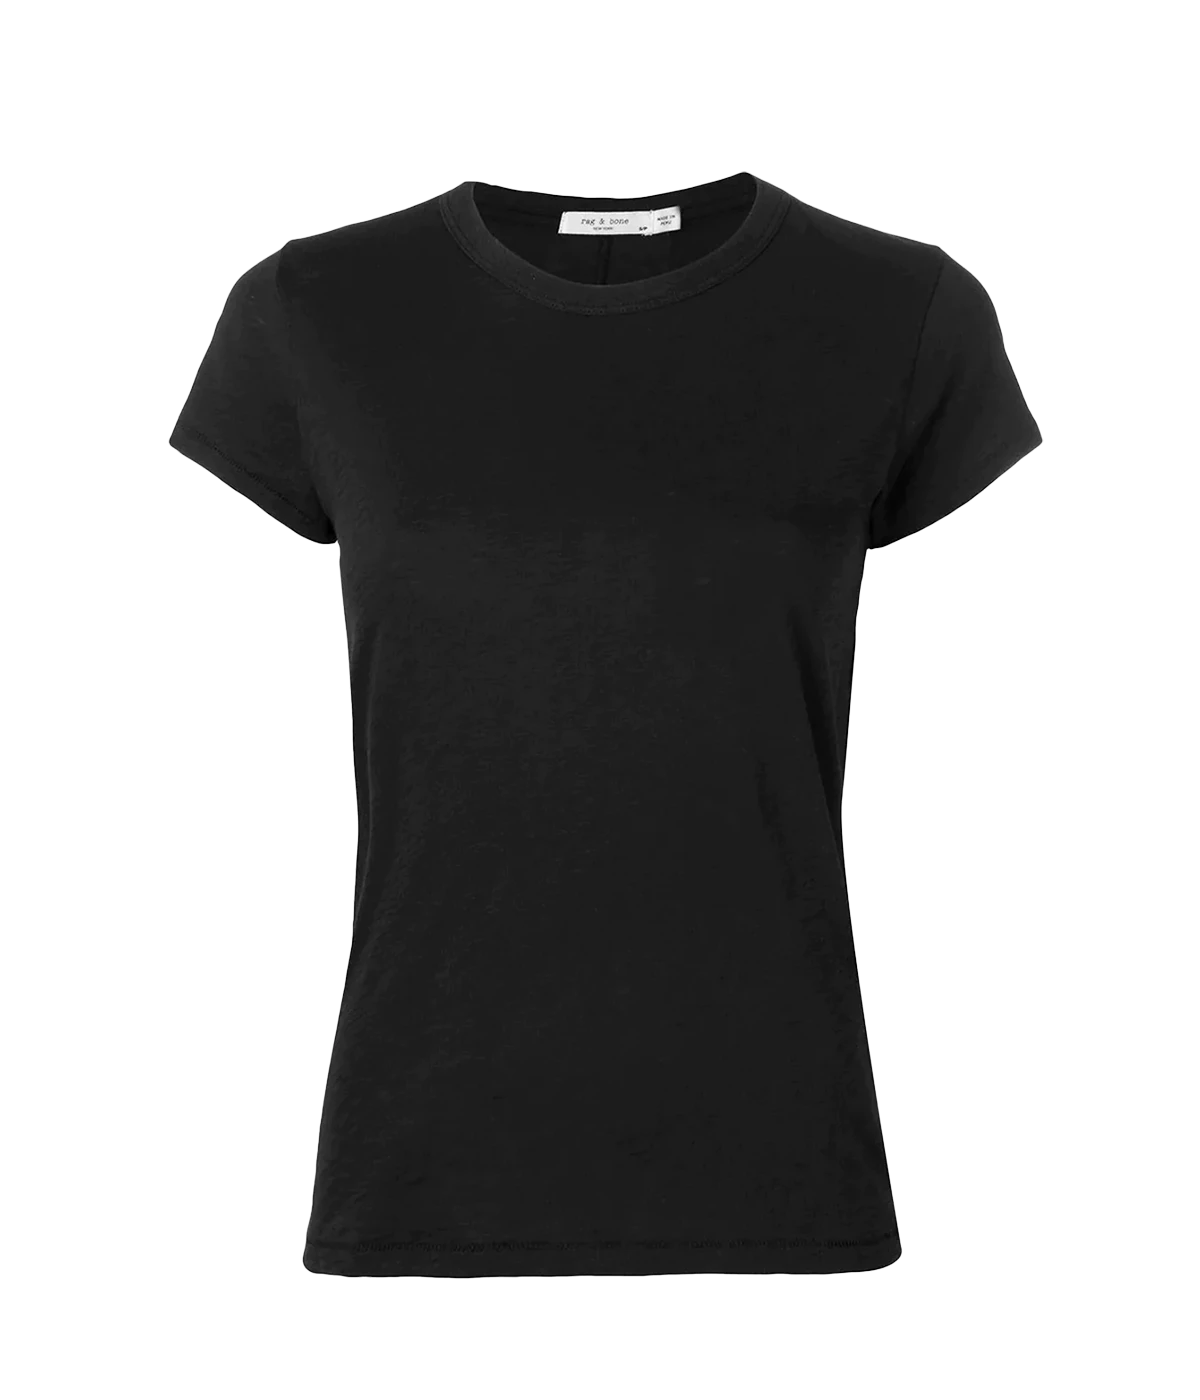 The Tee in Black